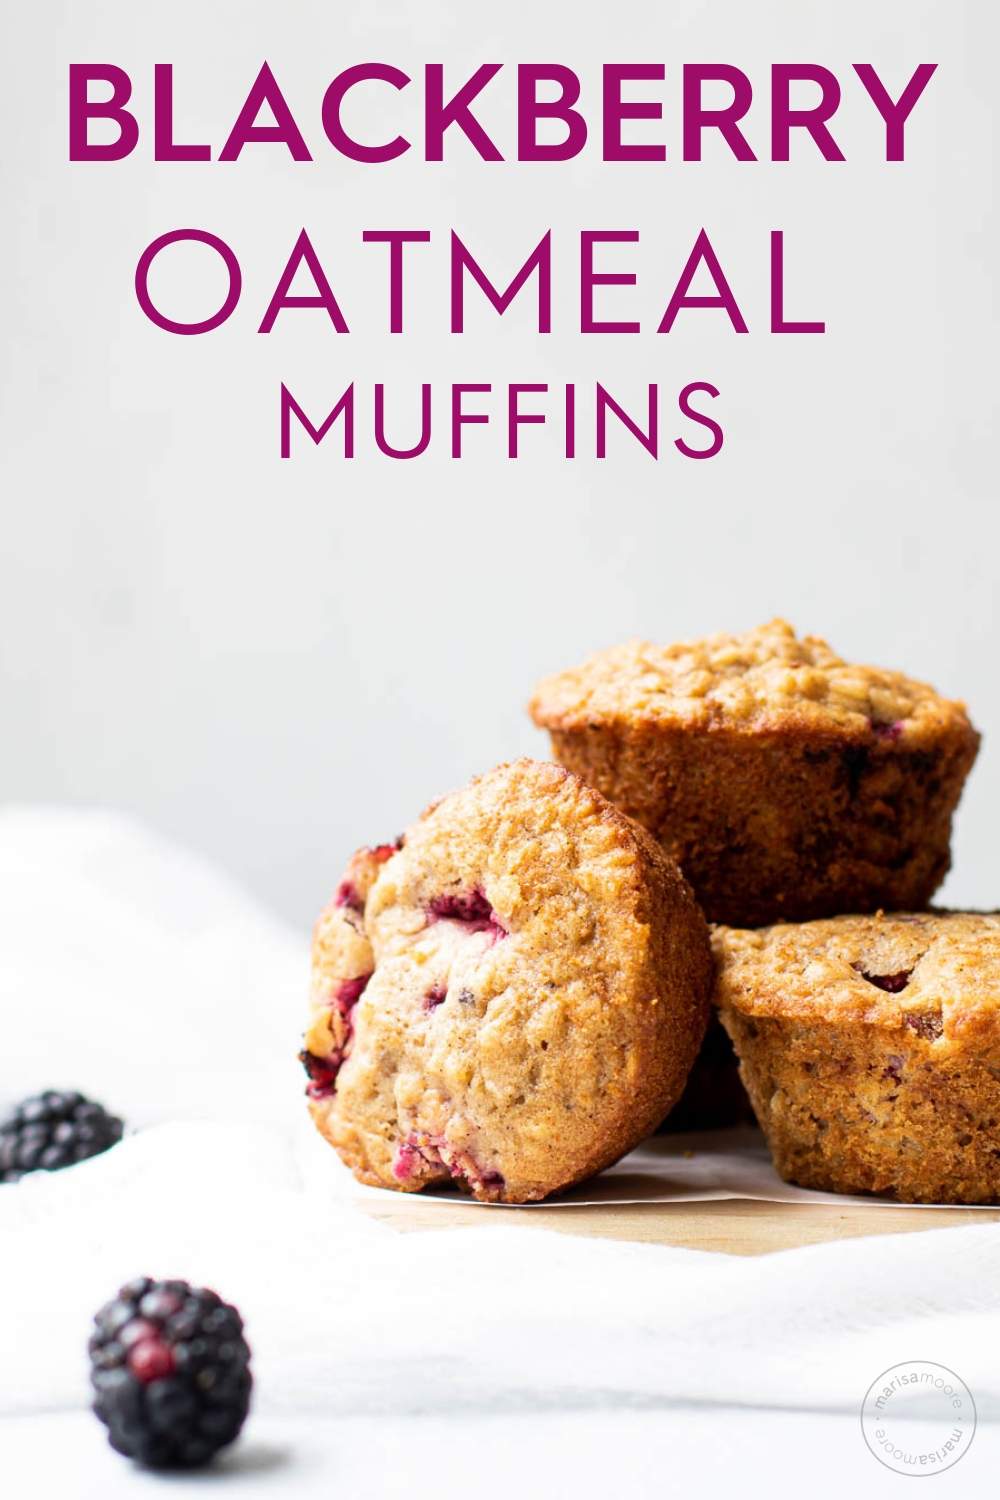 How to Make Blackberry Oatmeal Muffins